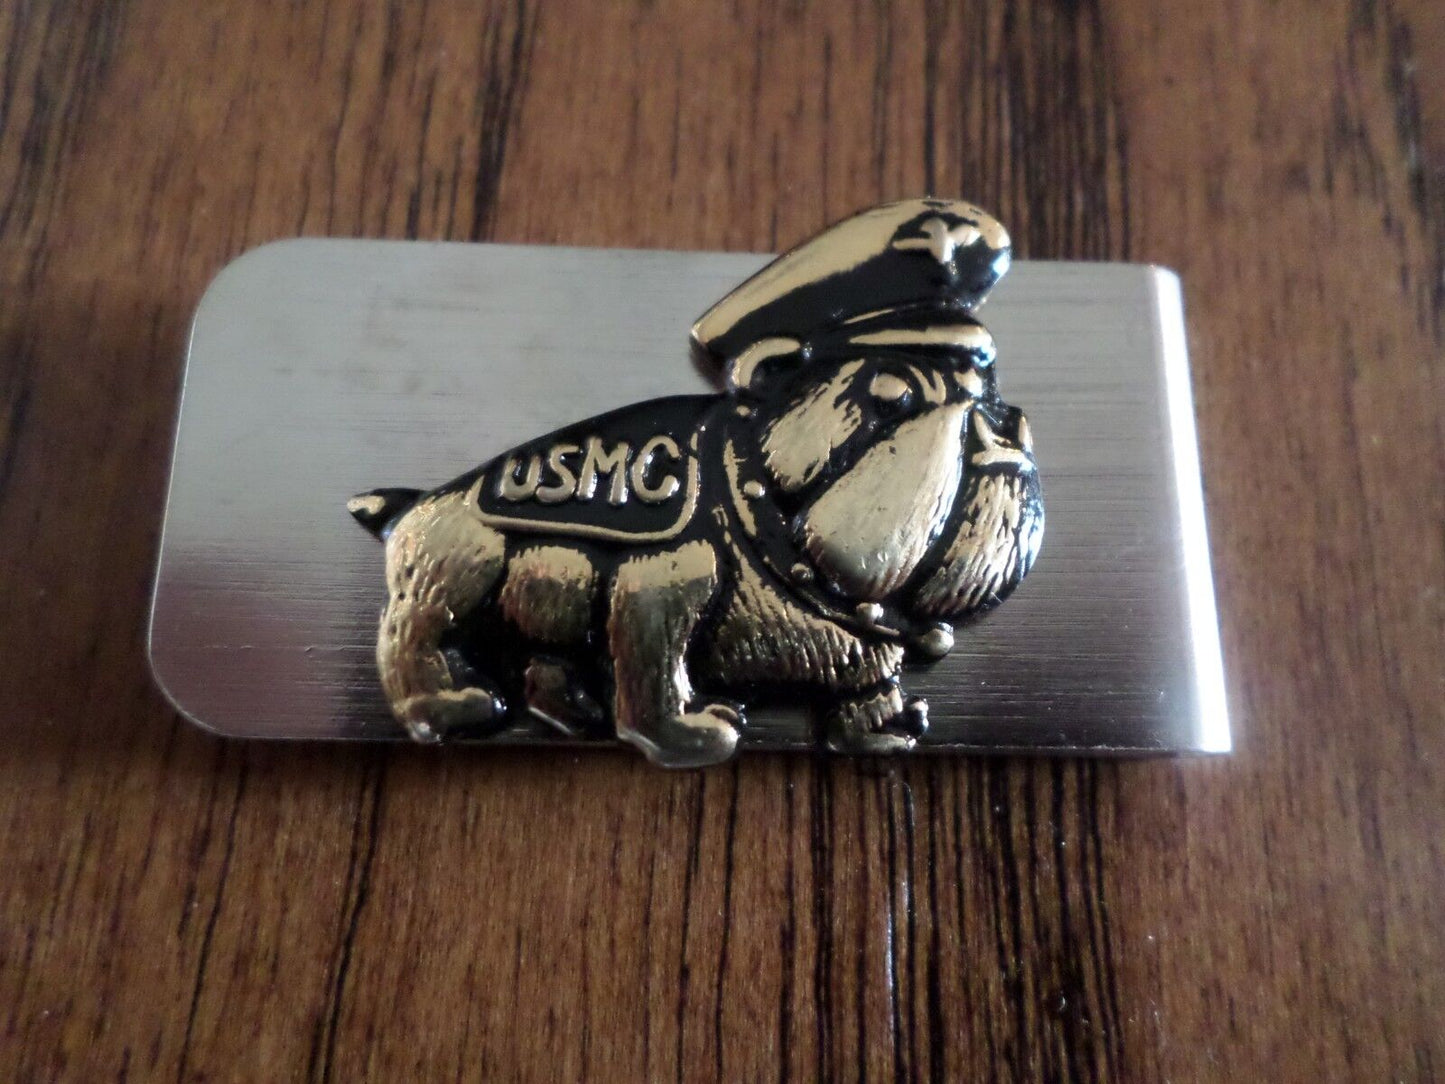 U.S MILITARY MARINE BULLDOG MONEY CLIP OFFICIAL LICENSED PRODUCT